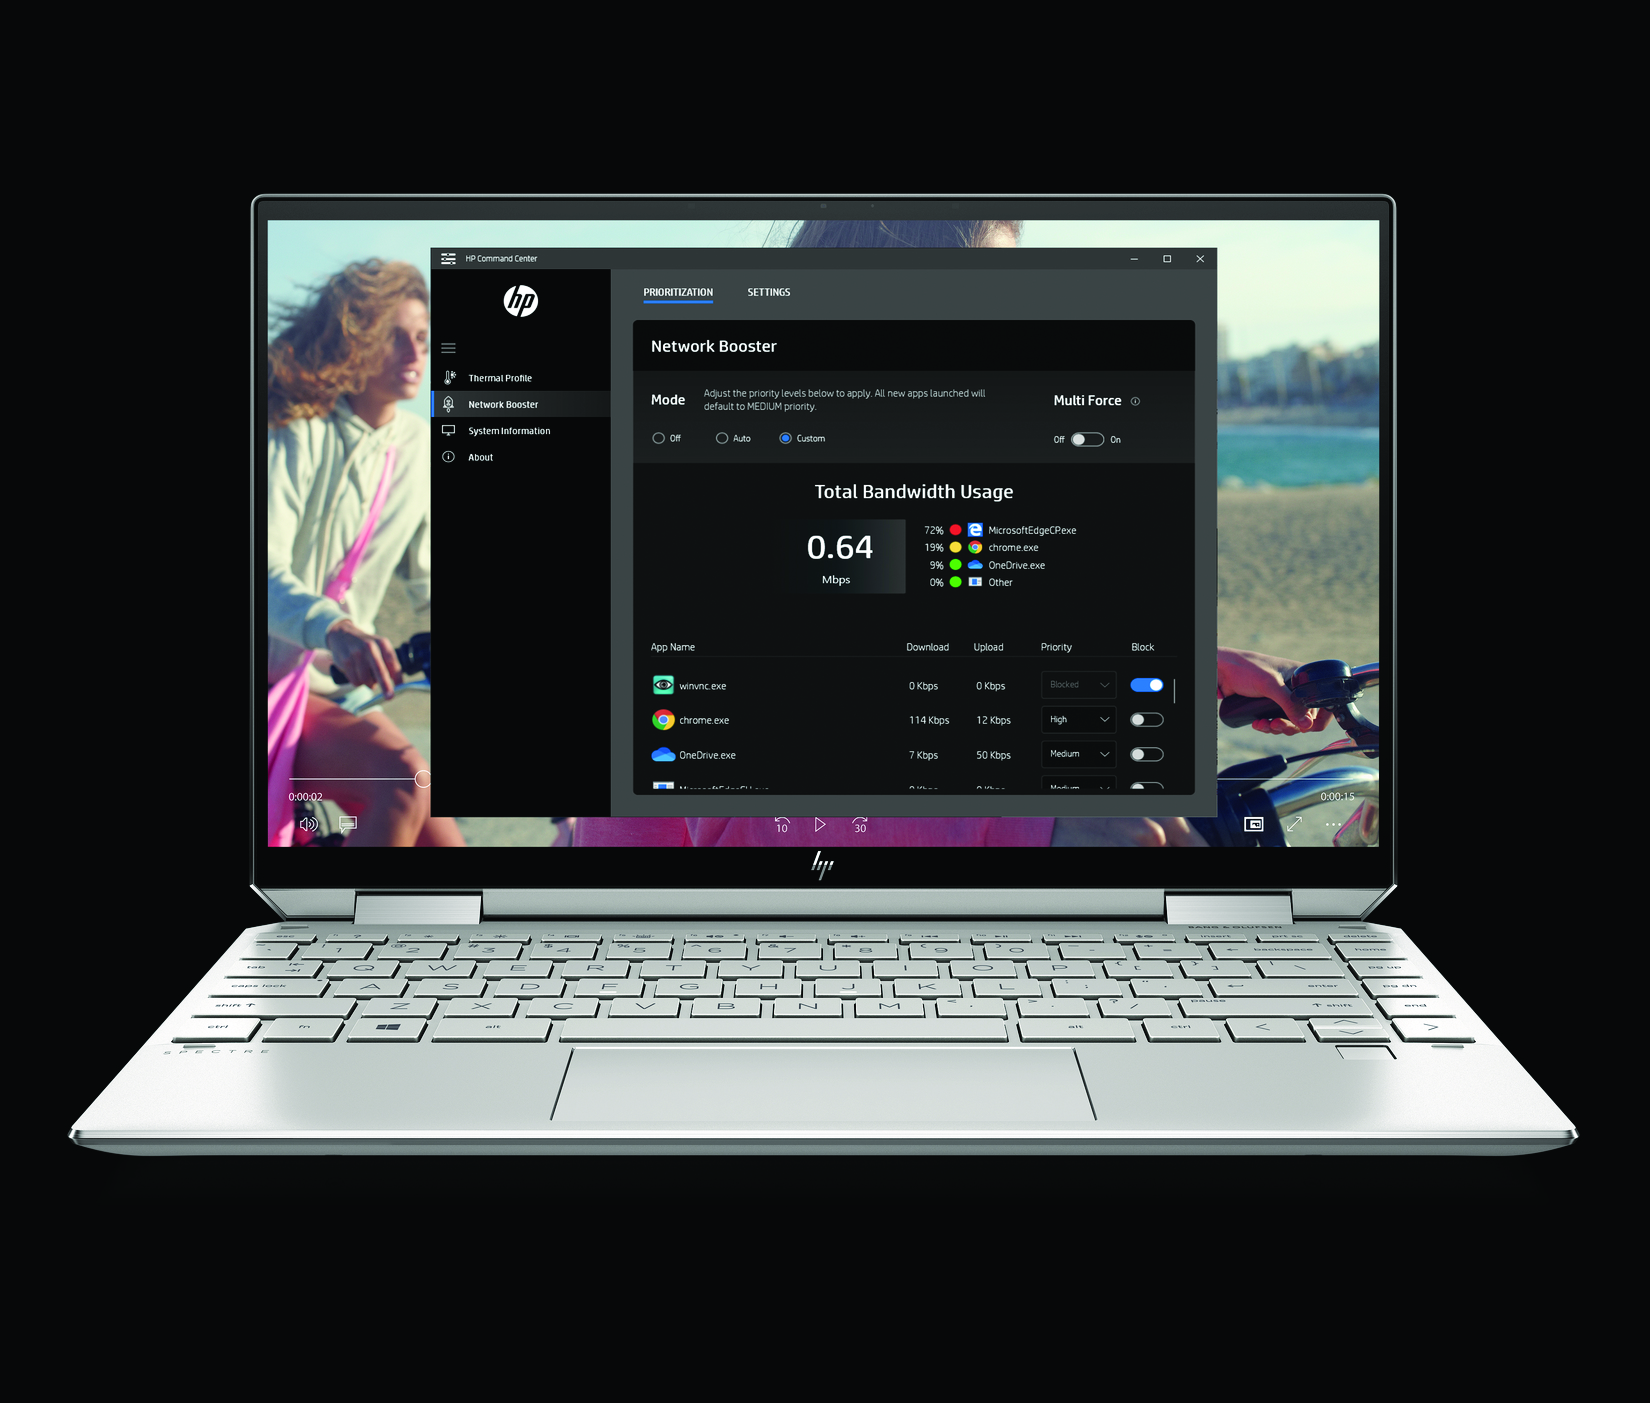 HP Spectre x360 13 with Network Booster in Natural Sillver